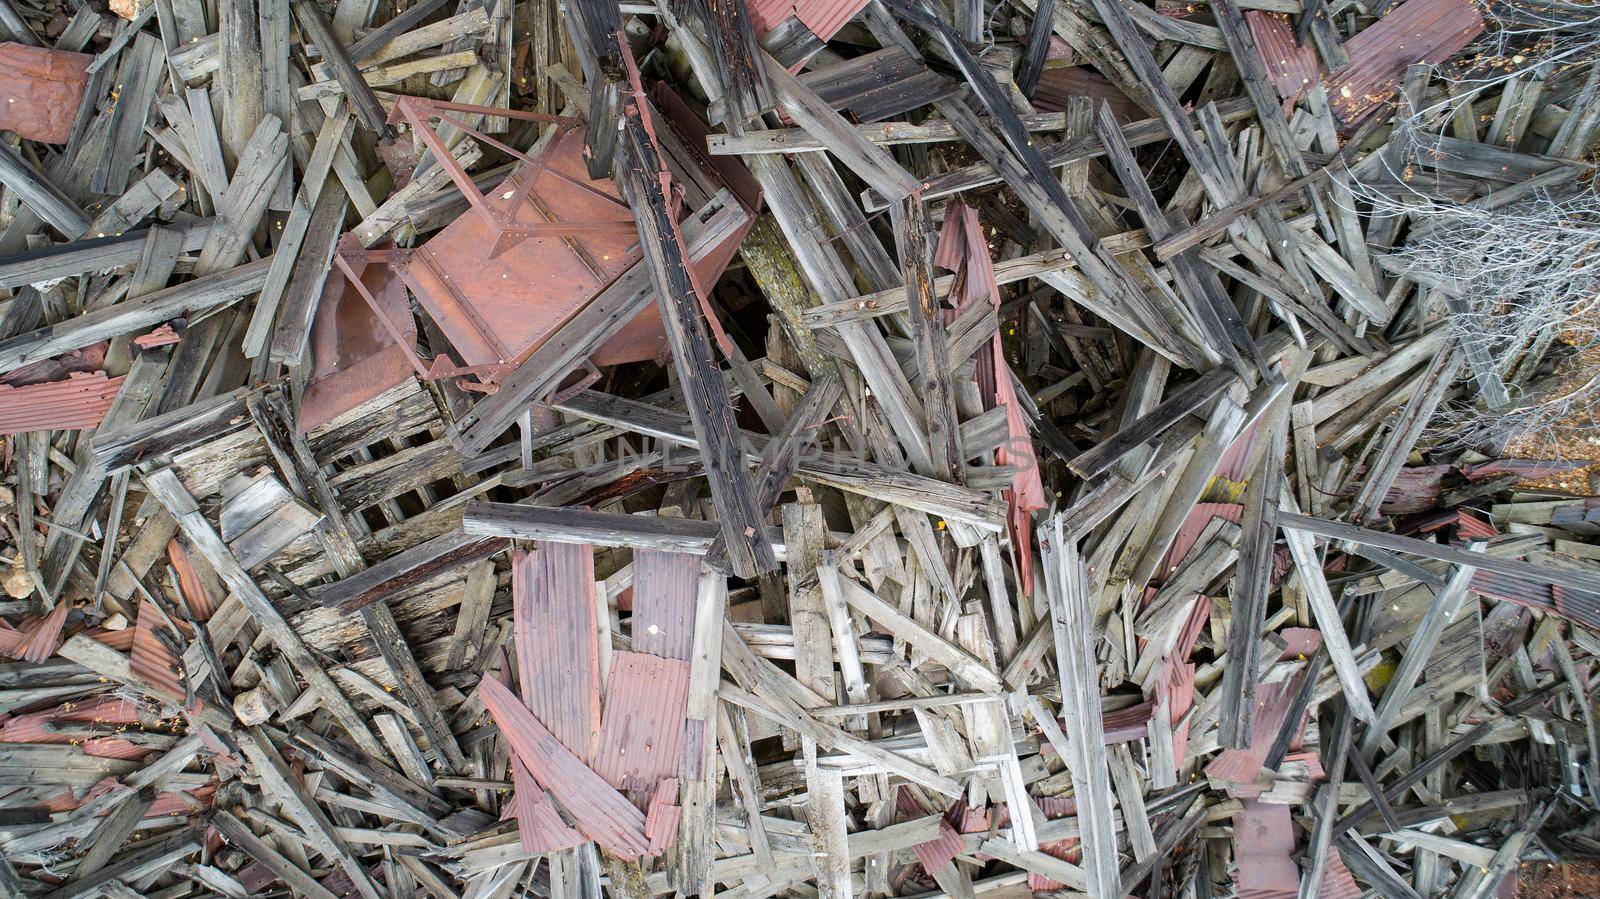 looking down on a pile of wood from a destroyed house